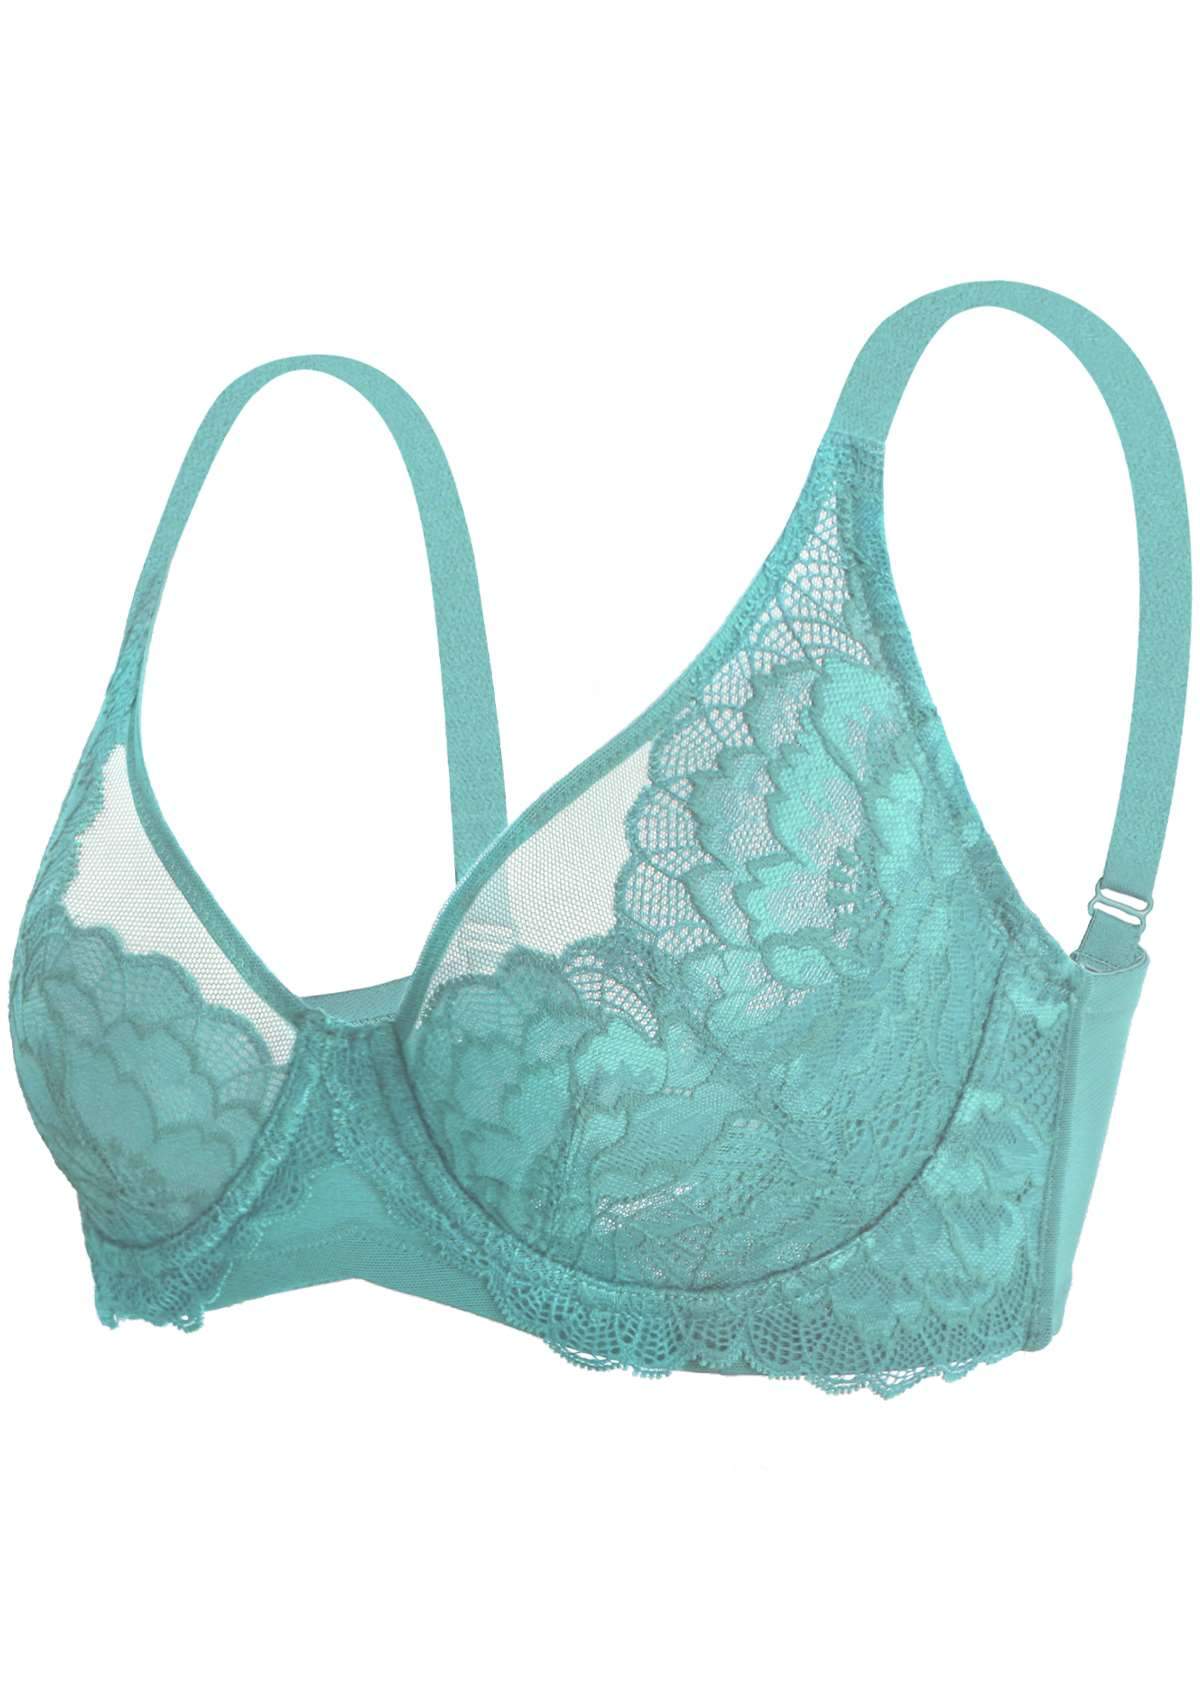 HSIA Paeonia Lace Full Coverage Underwire Non-Padded Uplifting Bra - Teal / 36 / DDD/F